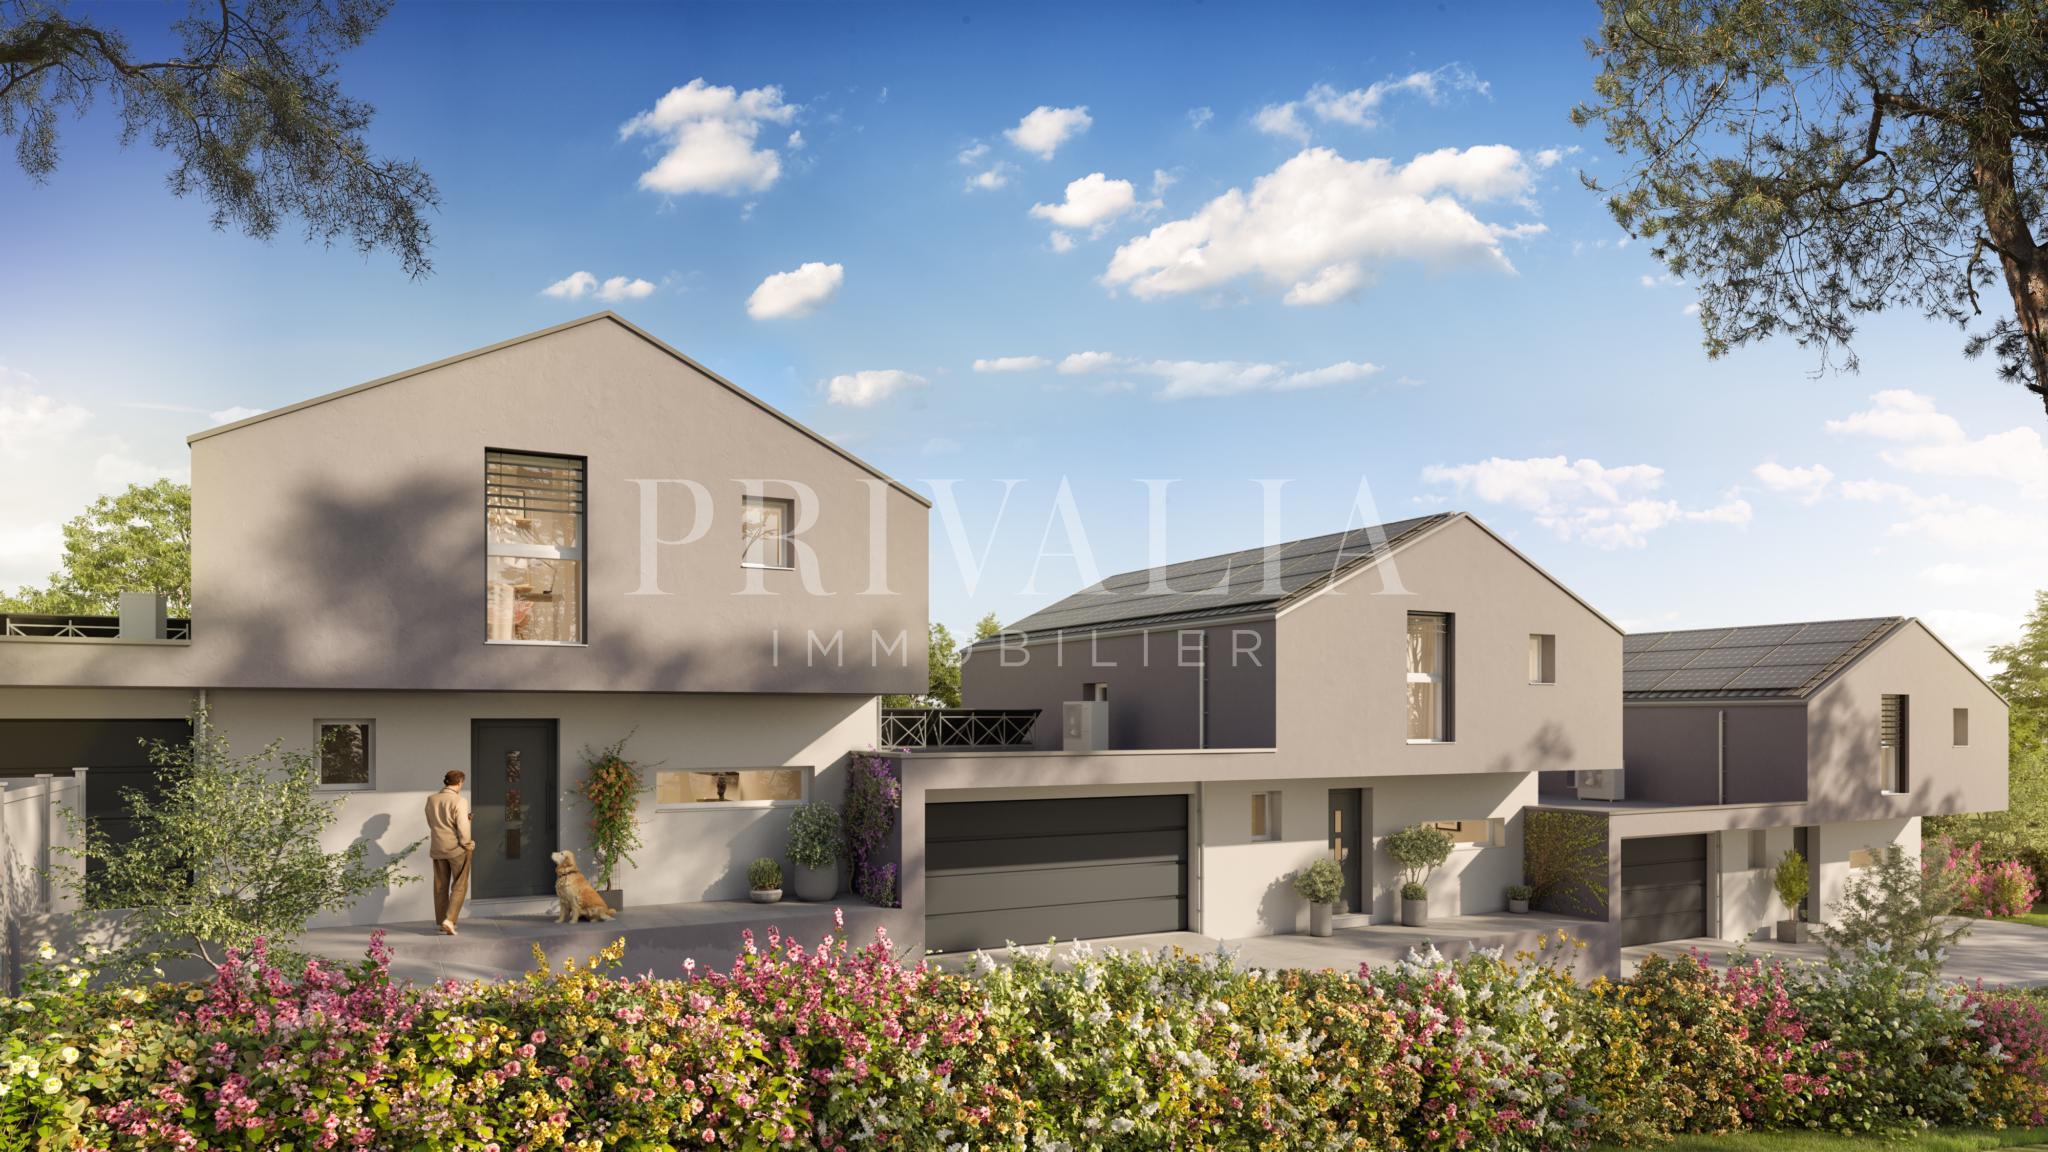 PrivaliaPreview: New development of 3 low-energy villas close to the International Organisations